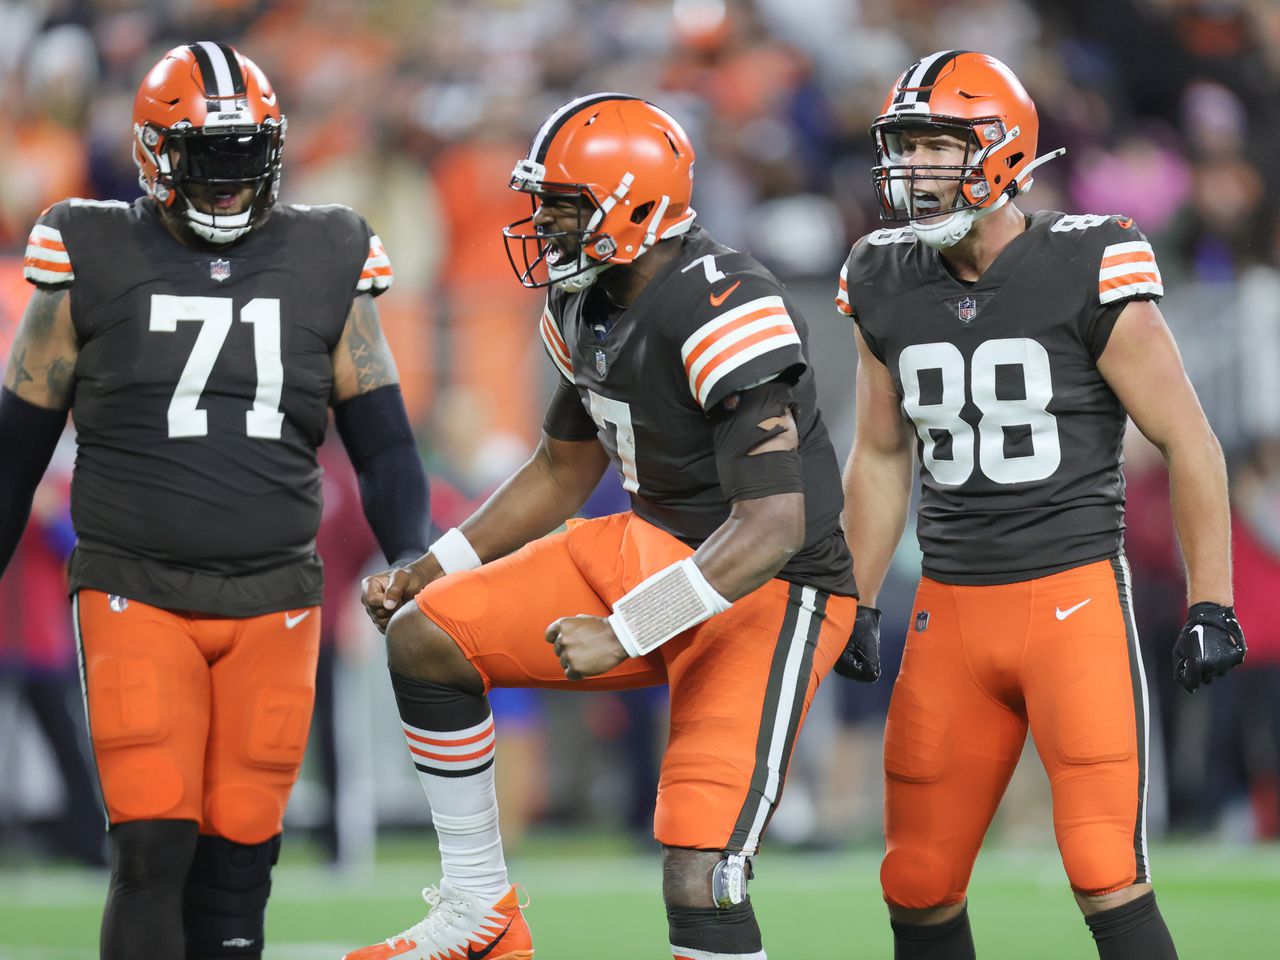 Thursday Night Football' Doesn't Disappoint, as Browns, Steelers Deliver 